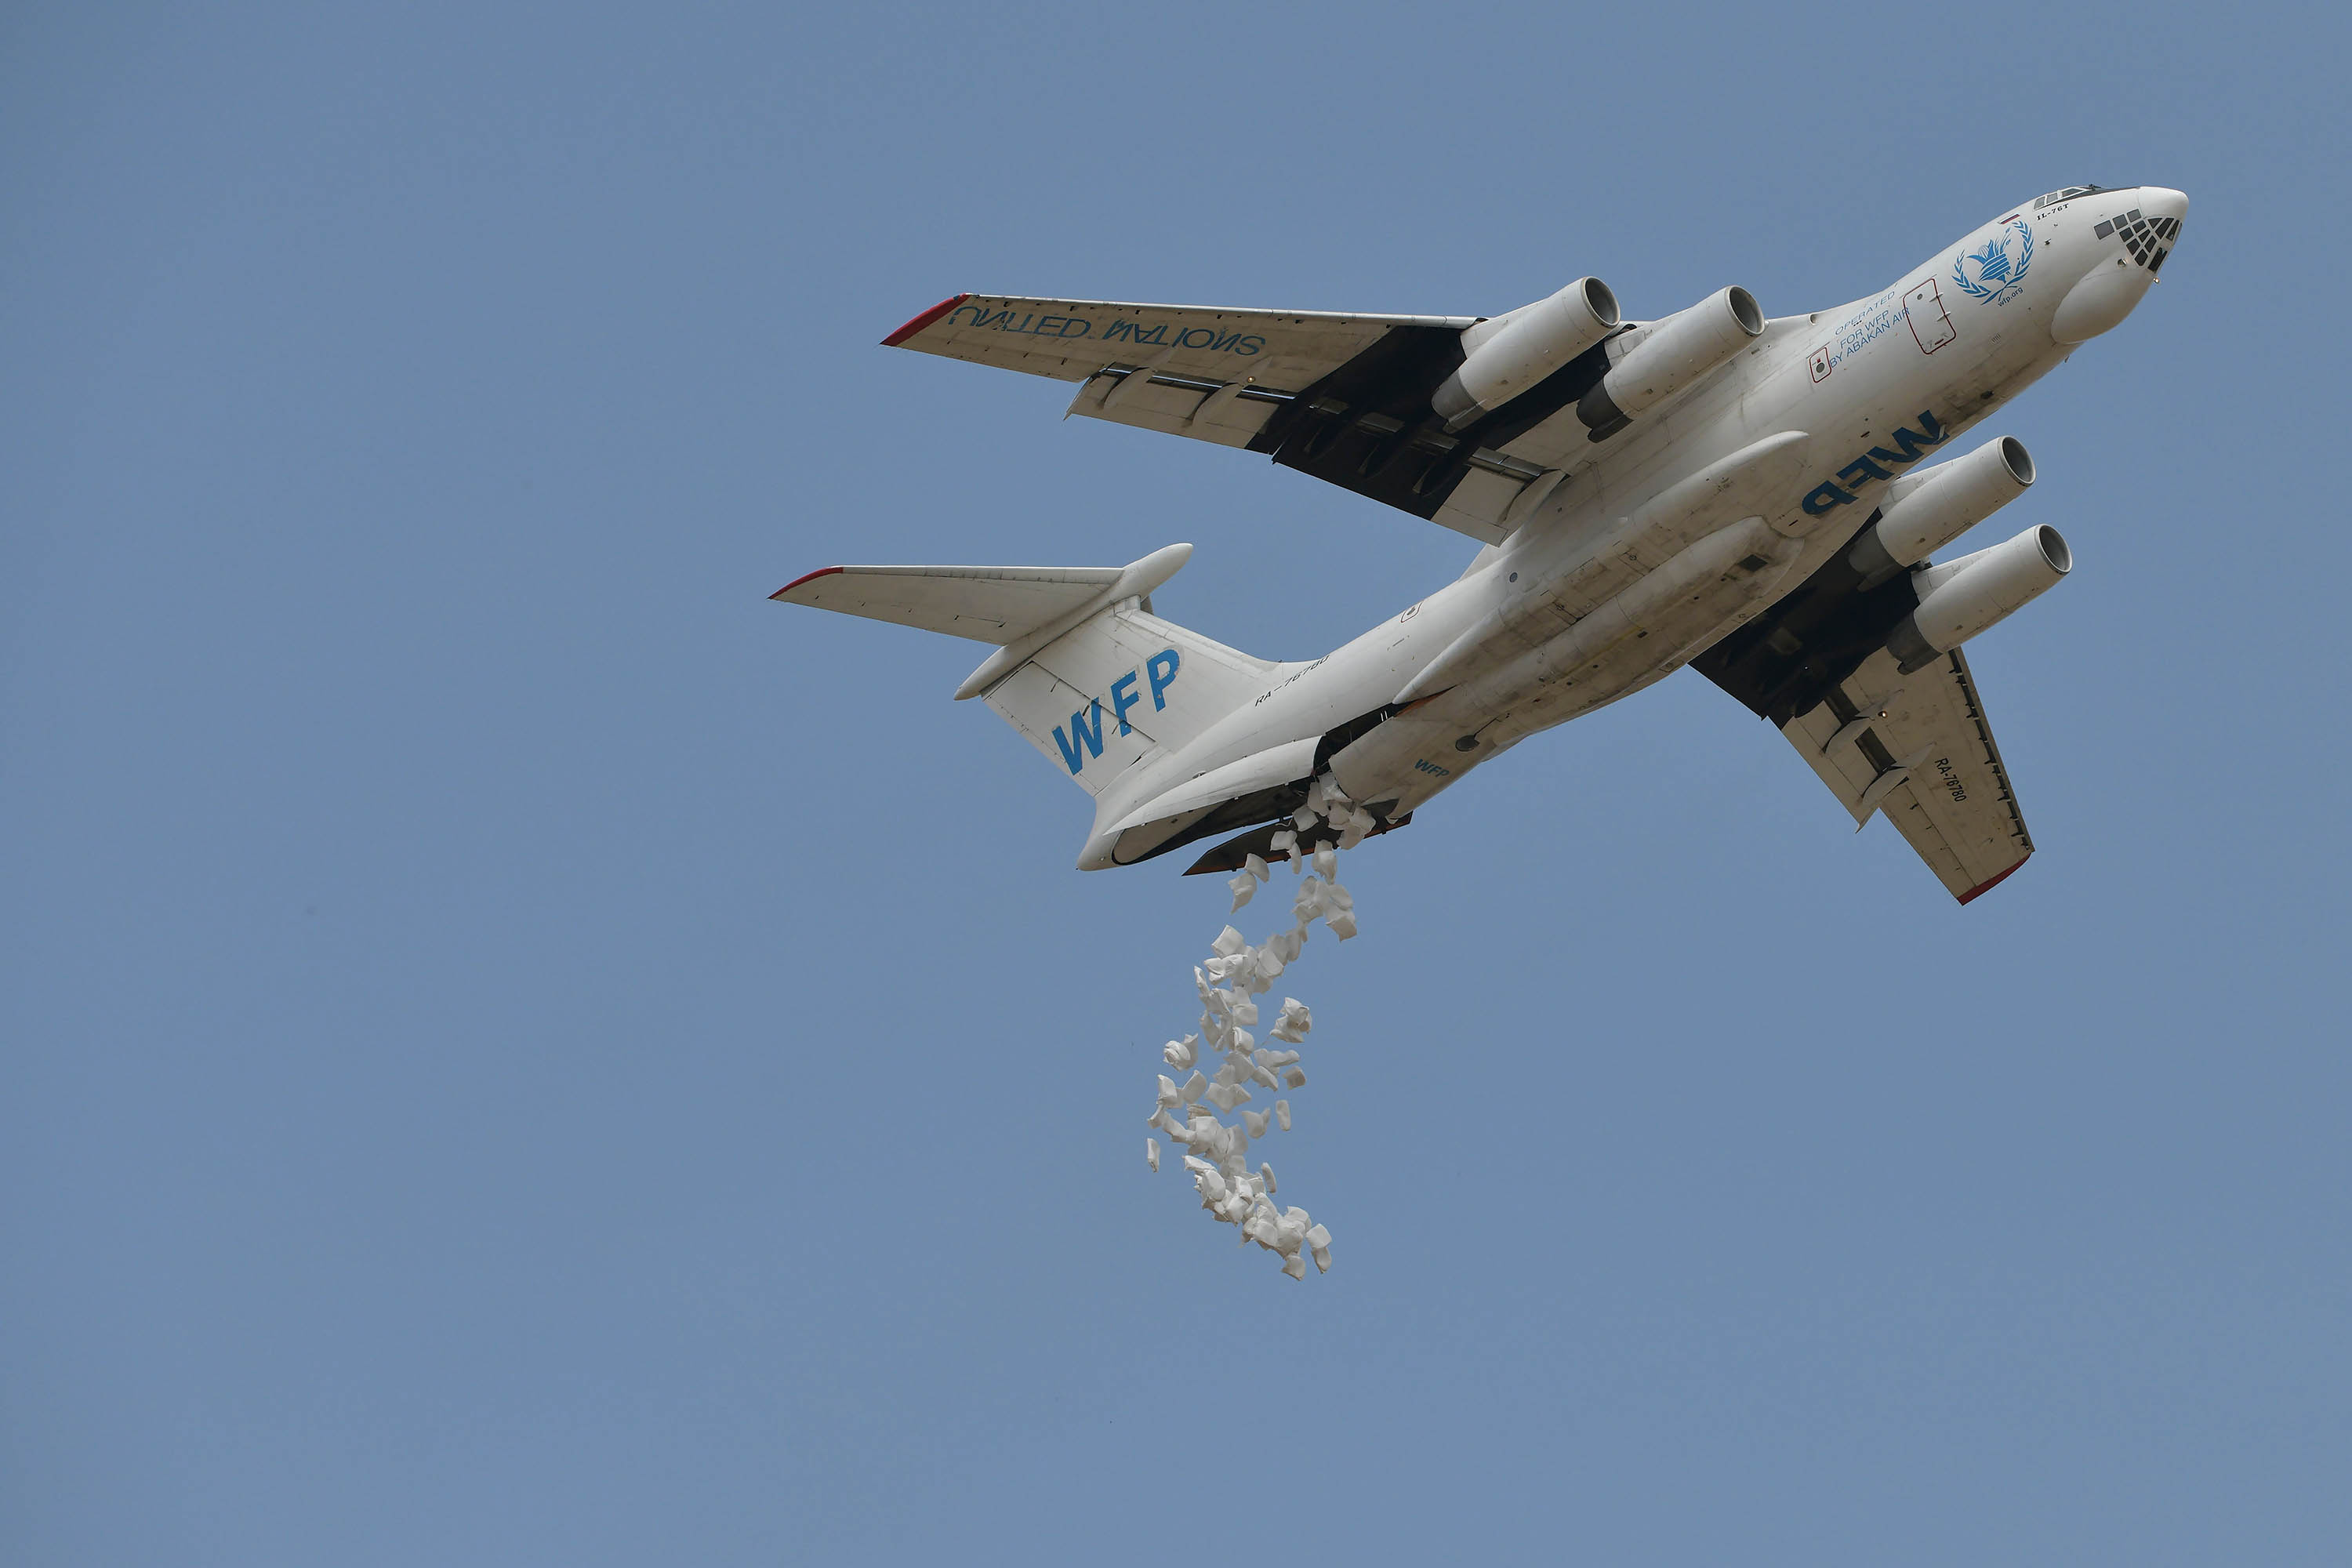 A plane leased to the World Food Programme (WFP) makes a drop of food aid near a village in Ayod county, South Sudan, on February 6.